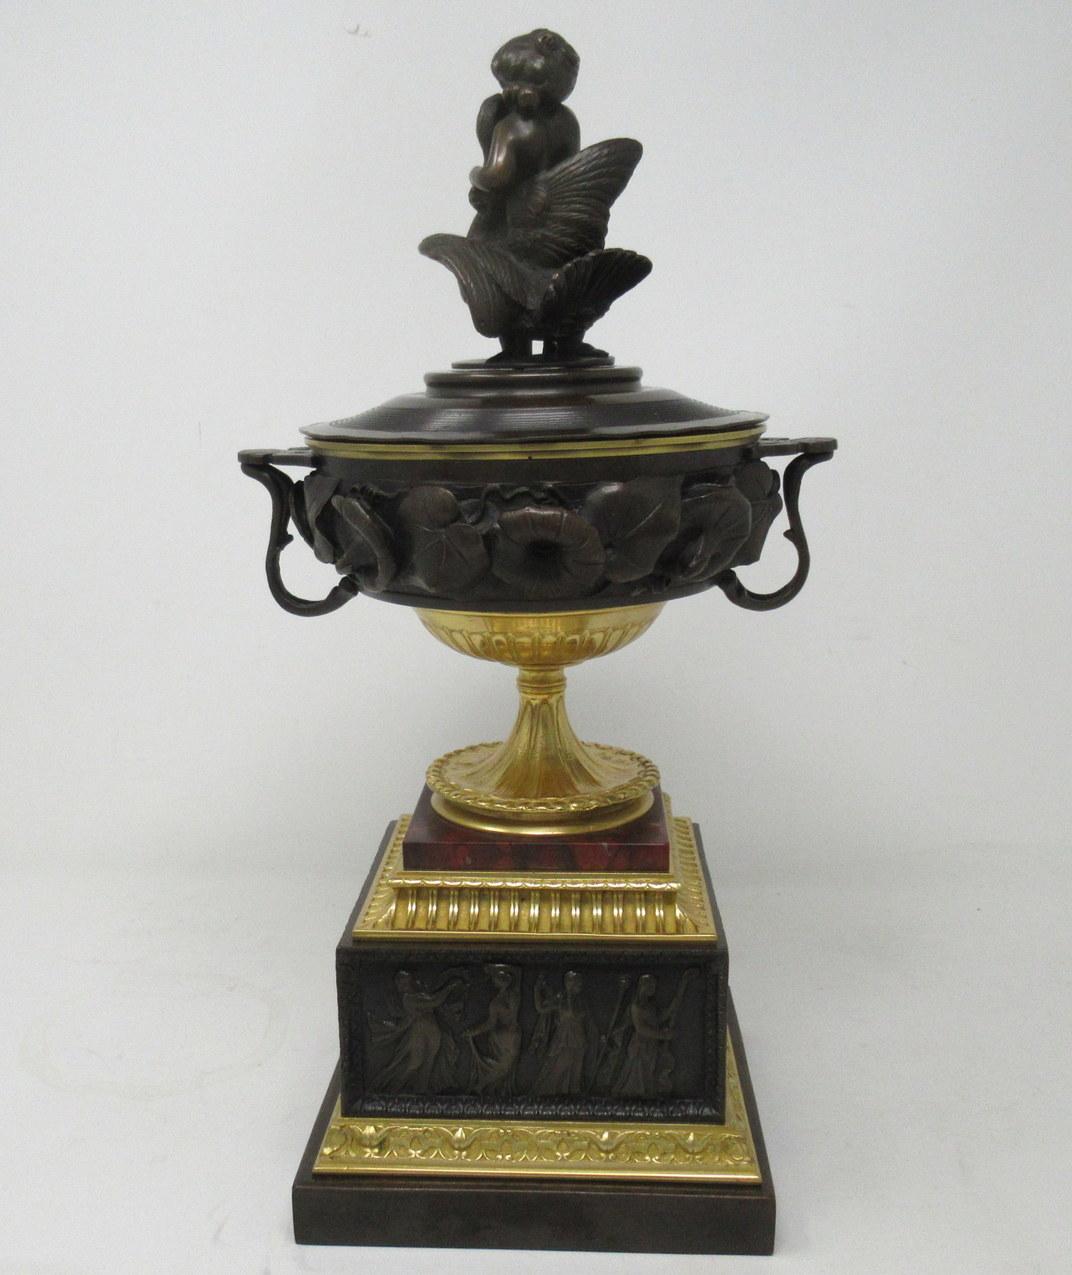 Superb Example of French lidded grand tour ormolu & bronze cast heavy duty model of a two handled Urn of Museum quality. First quarter of the Nineteenth Century, possibly Regency period. 

The main bowl with lavish cast applied leaf and flower